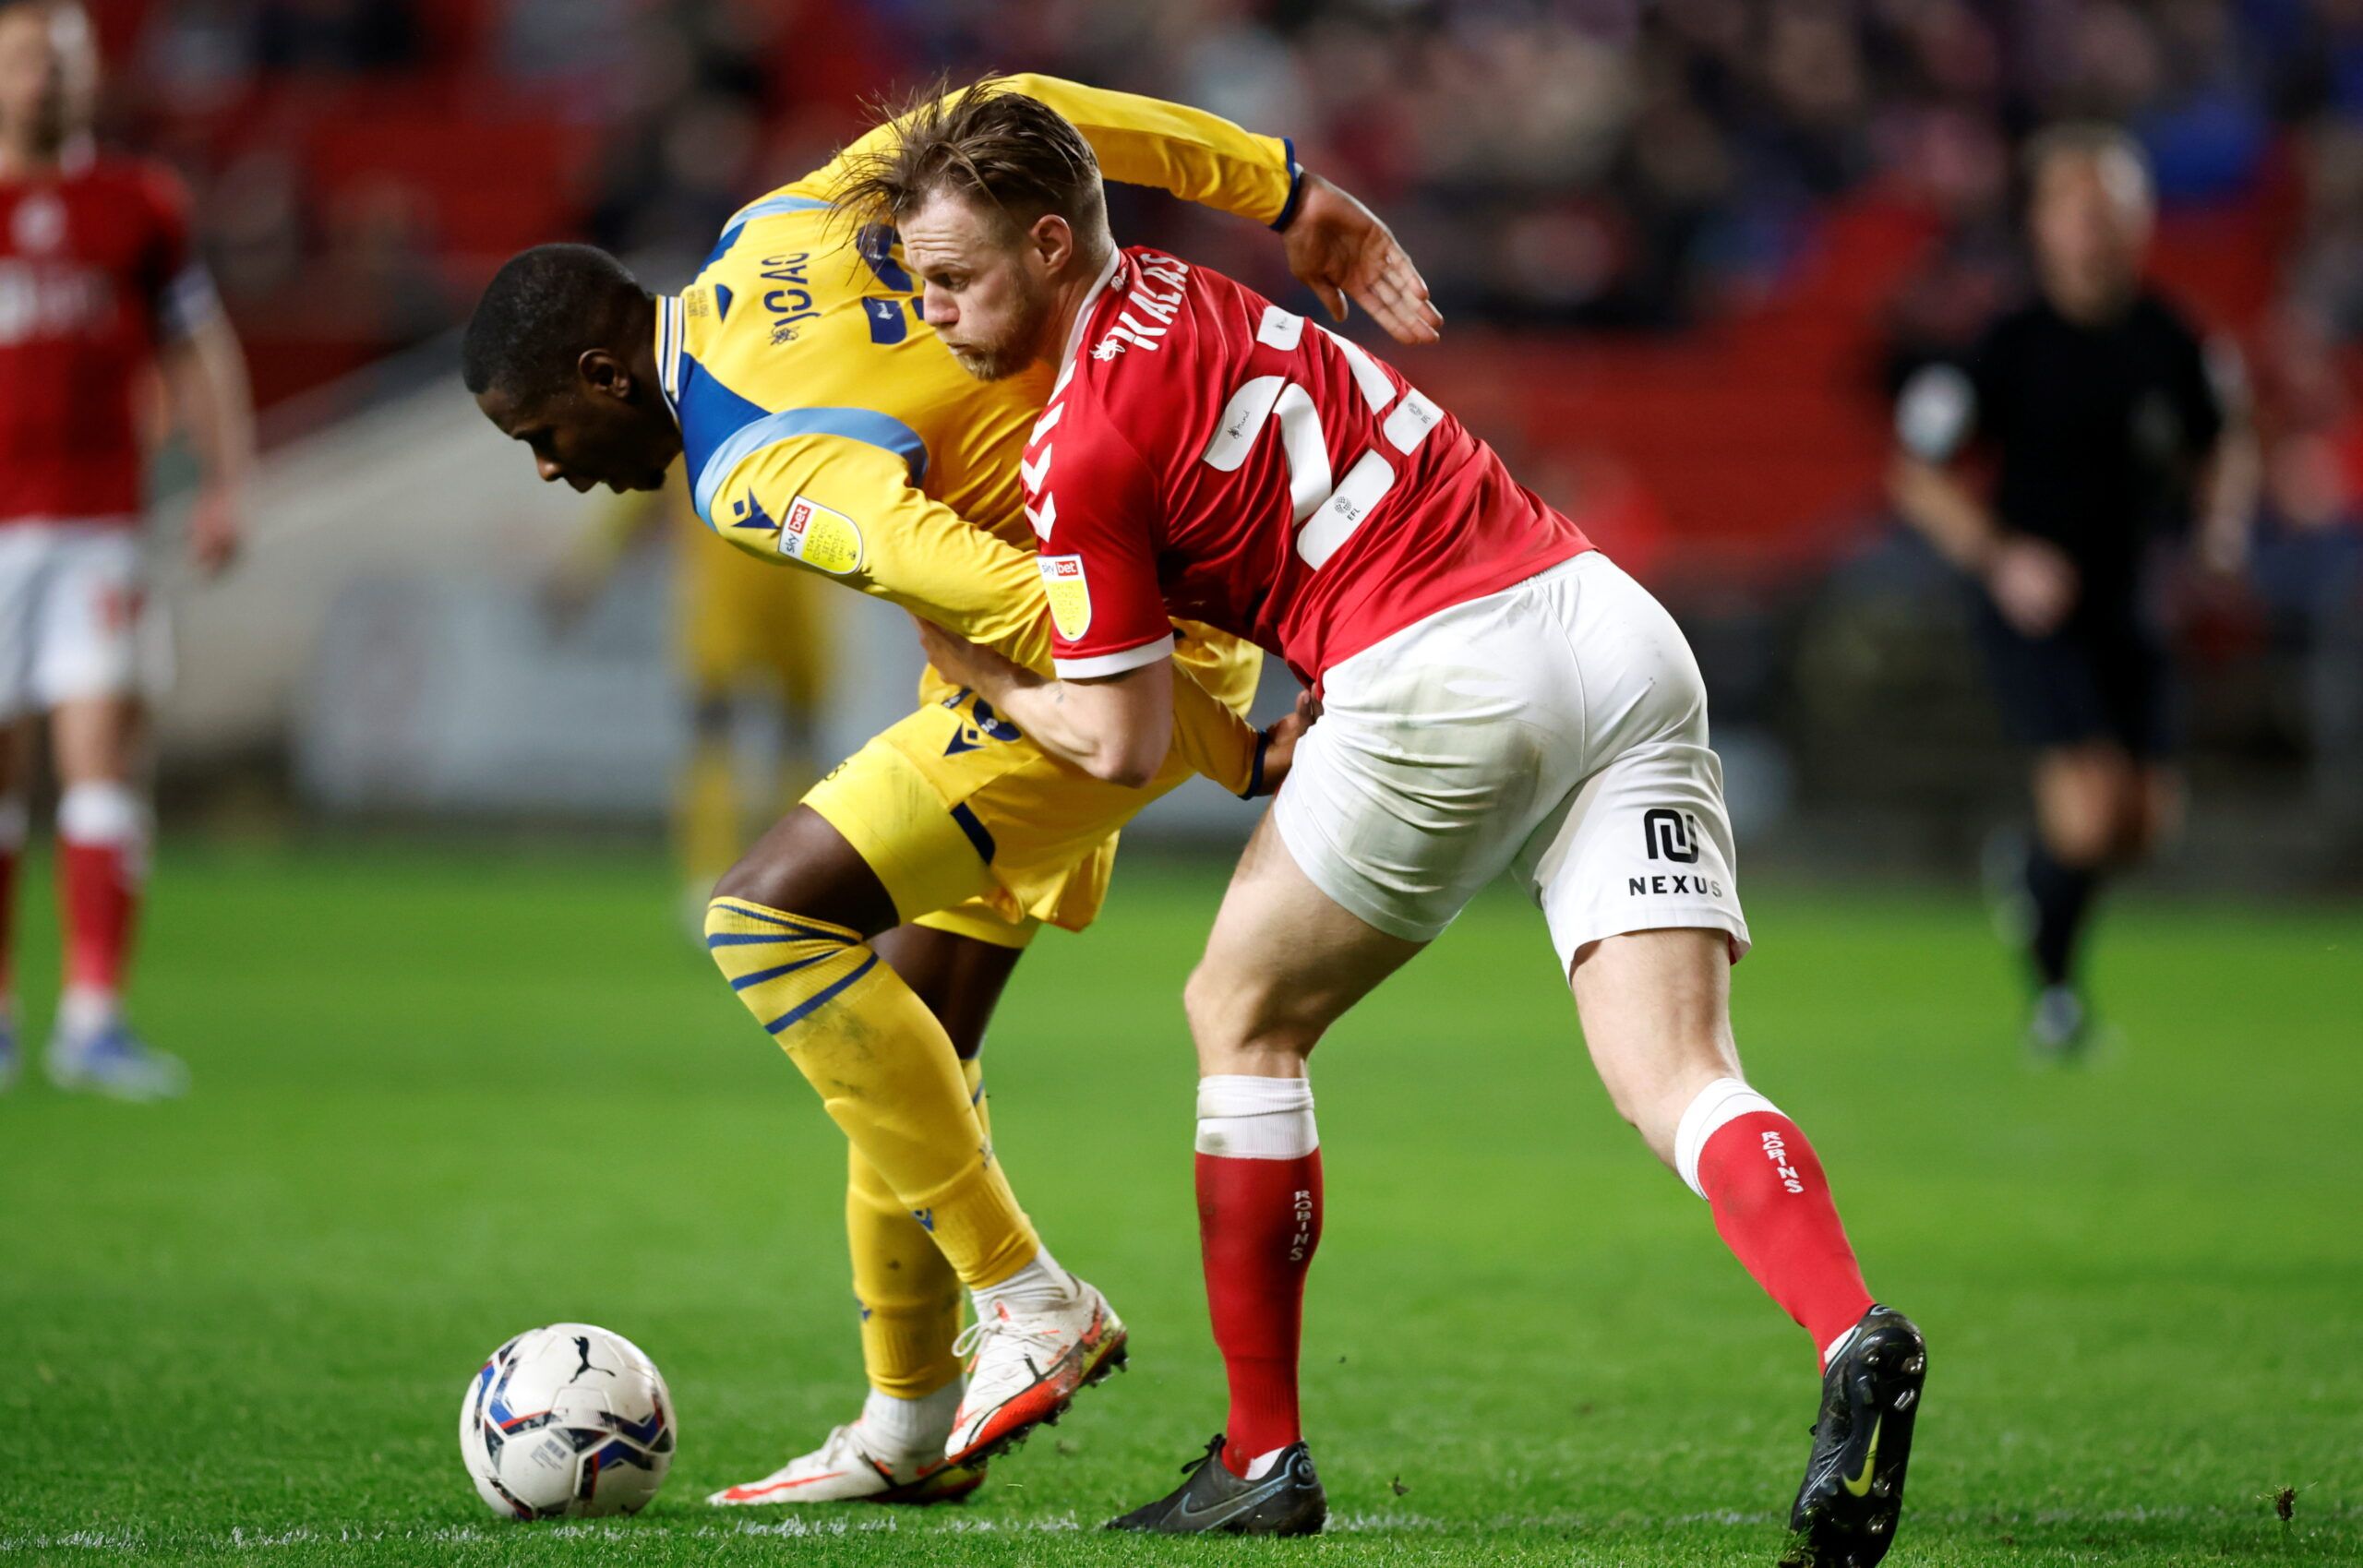 Soccer Football - Championship - Bristol City v Reading - Ashton Gate Stadium, Bristol, Britain - February 9, 2022  Bristol City?s Tomas Kalas in action with Reading?s Lucas Joao  Action Images/Peter Cziborra  EDITORIAL USE ONLY. No use with unauthorized audio, video, data, fixture lists, club/league logos or 